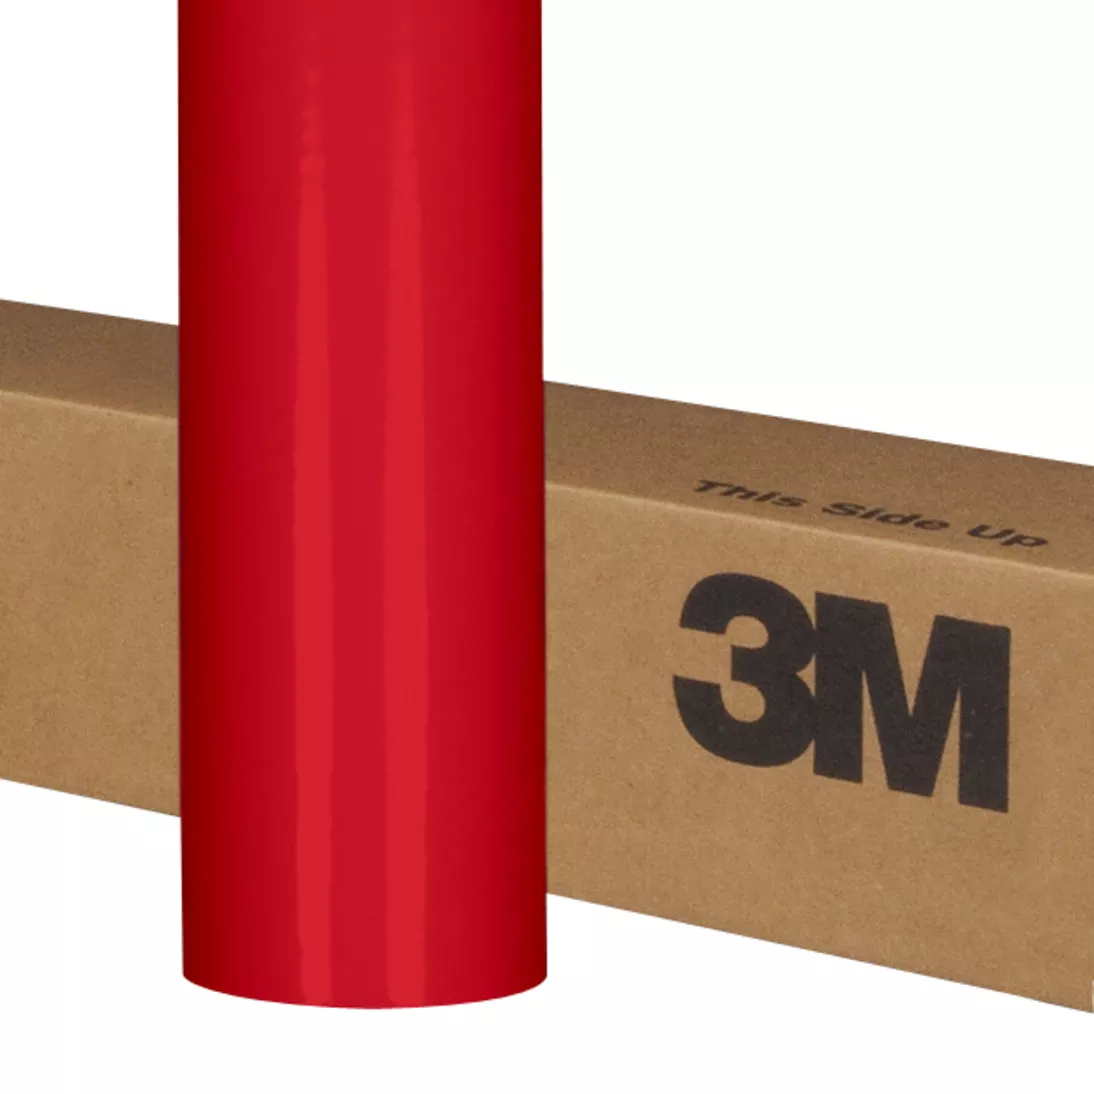 3M™ Envision™ Translucent Film Series 3730-33L, Red, 48 in x 50 yd